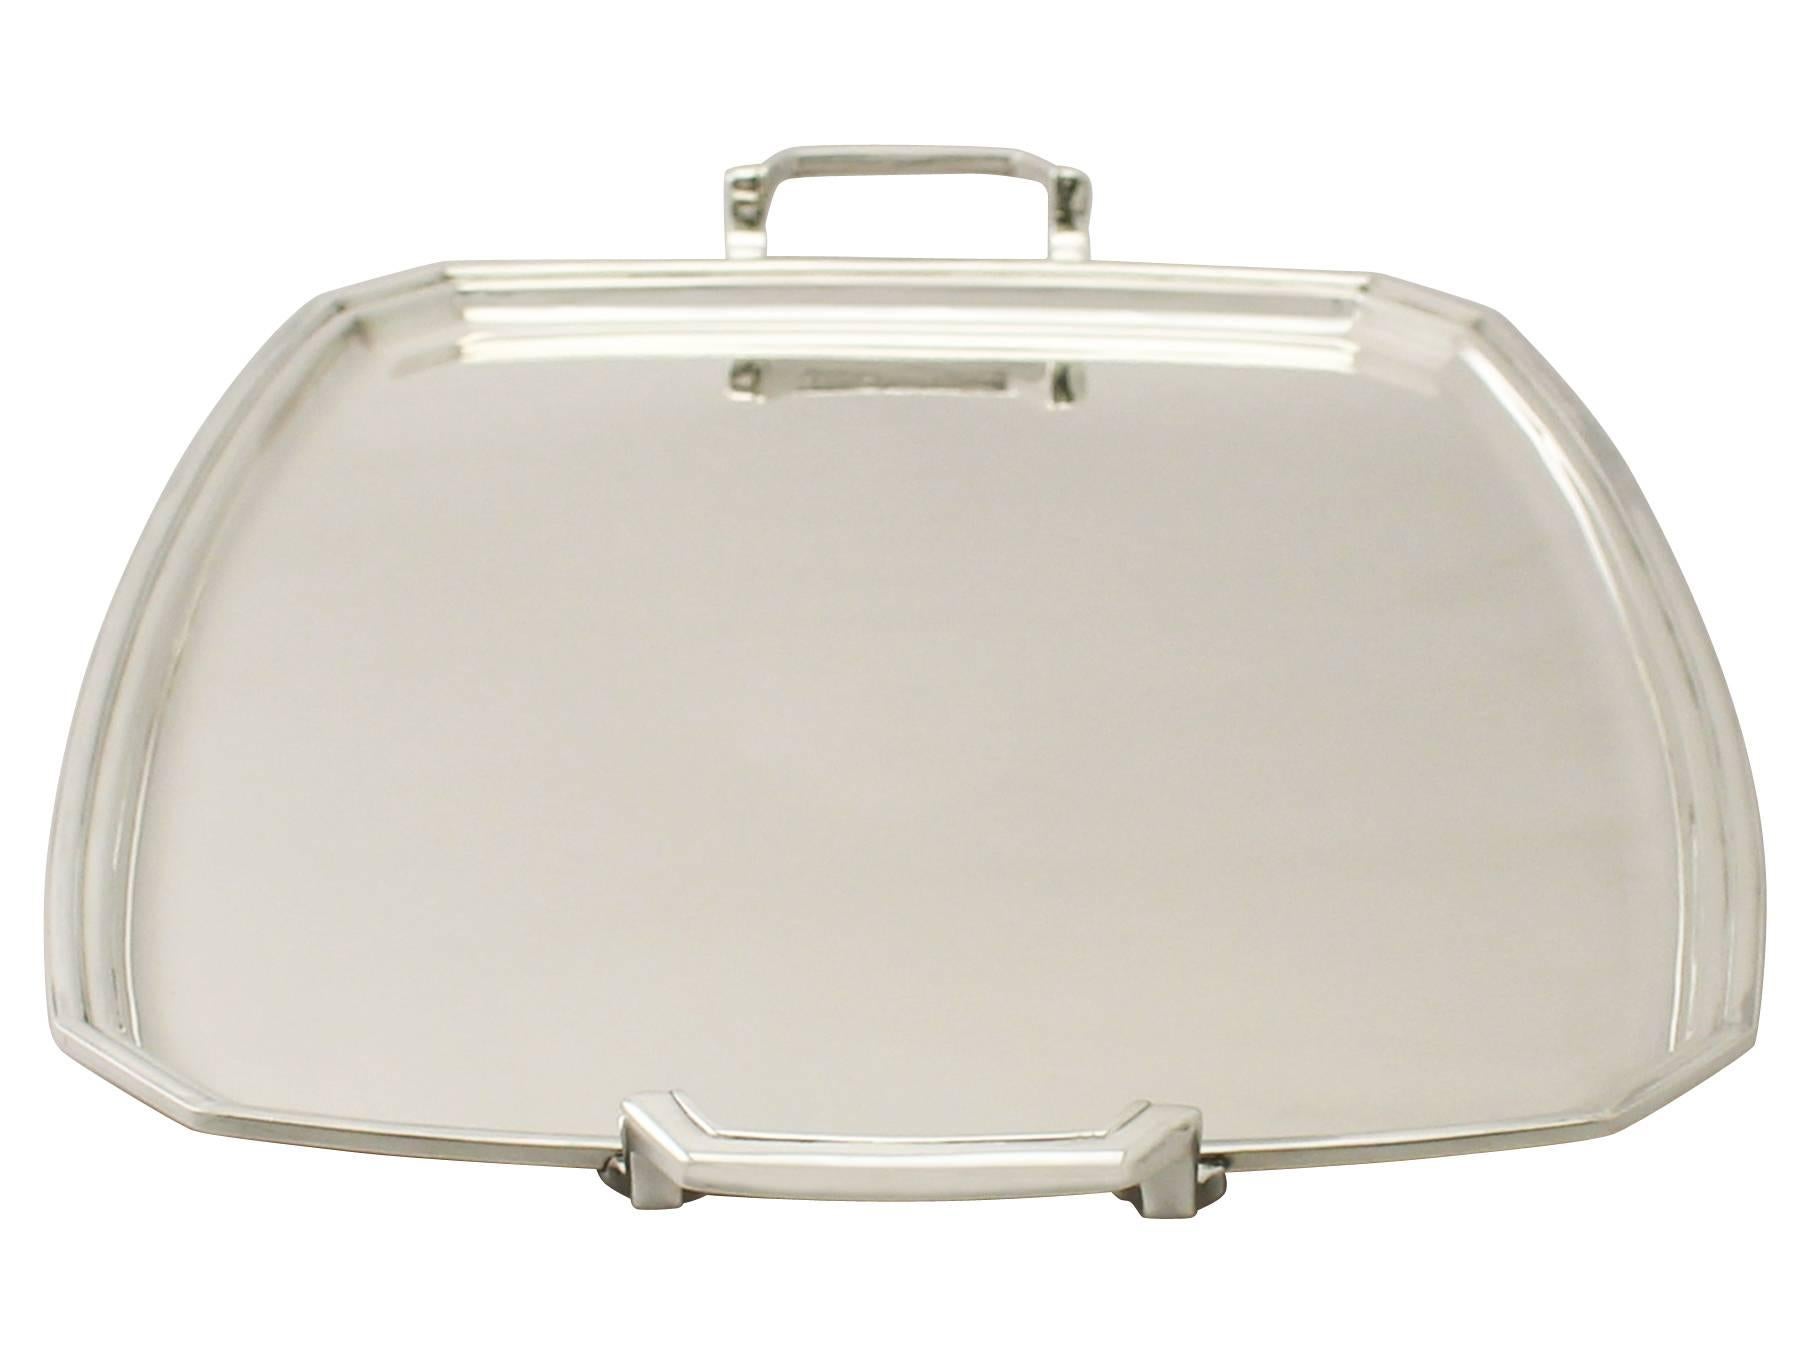 English Sterling Silver Tray, Art Deco Style, Vintage George VI